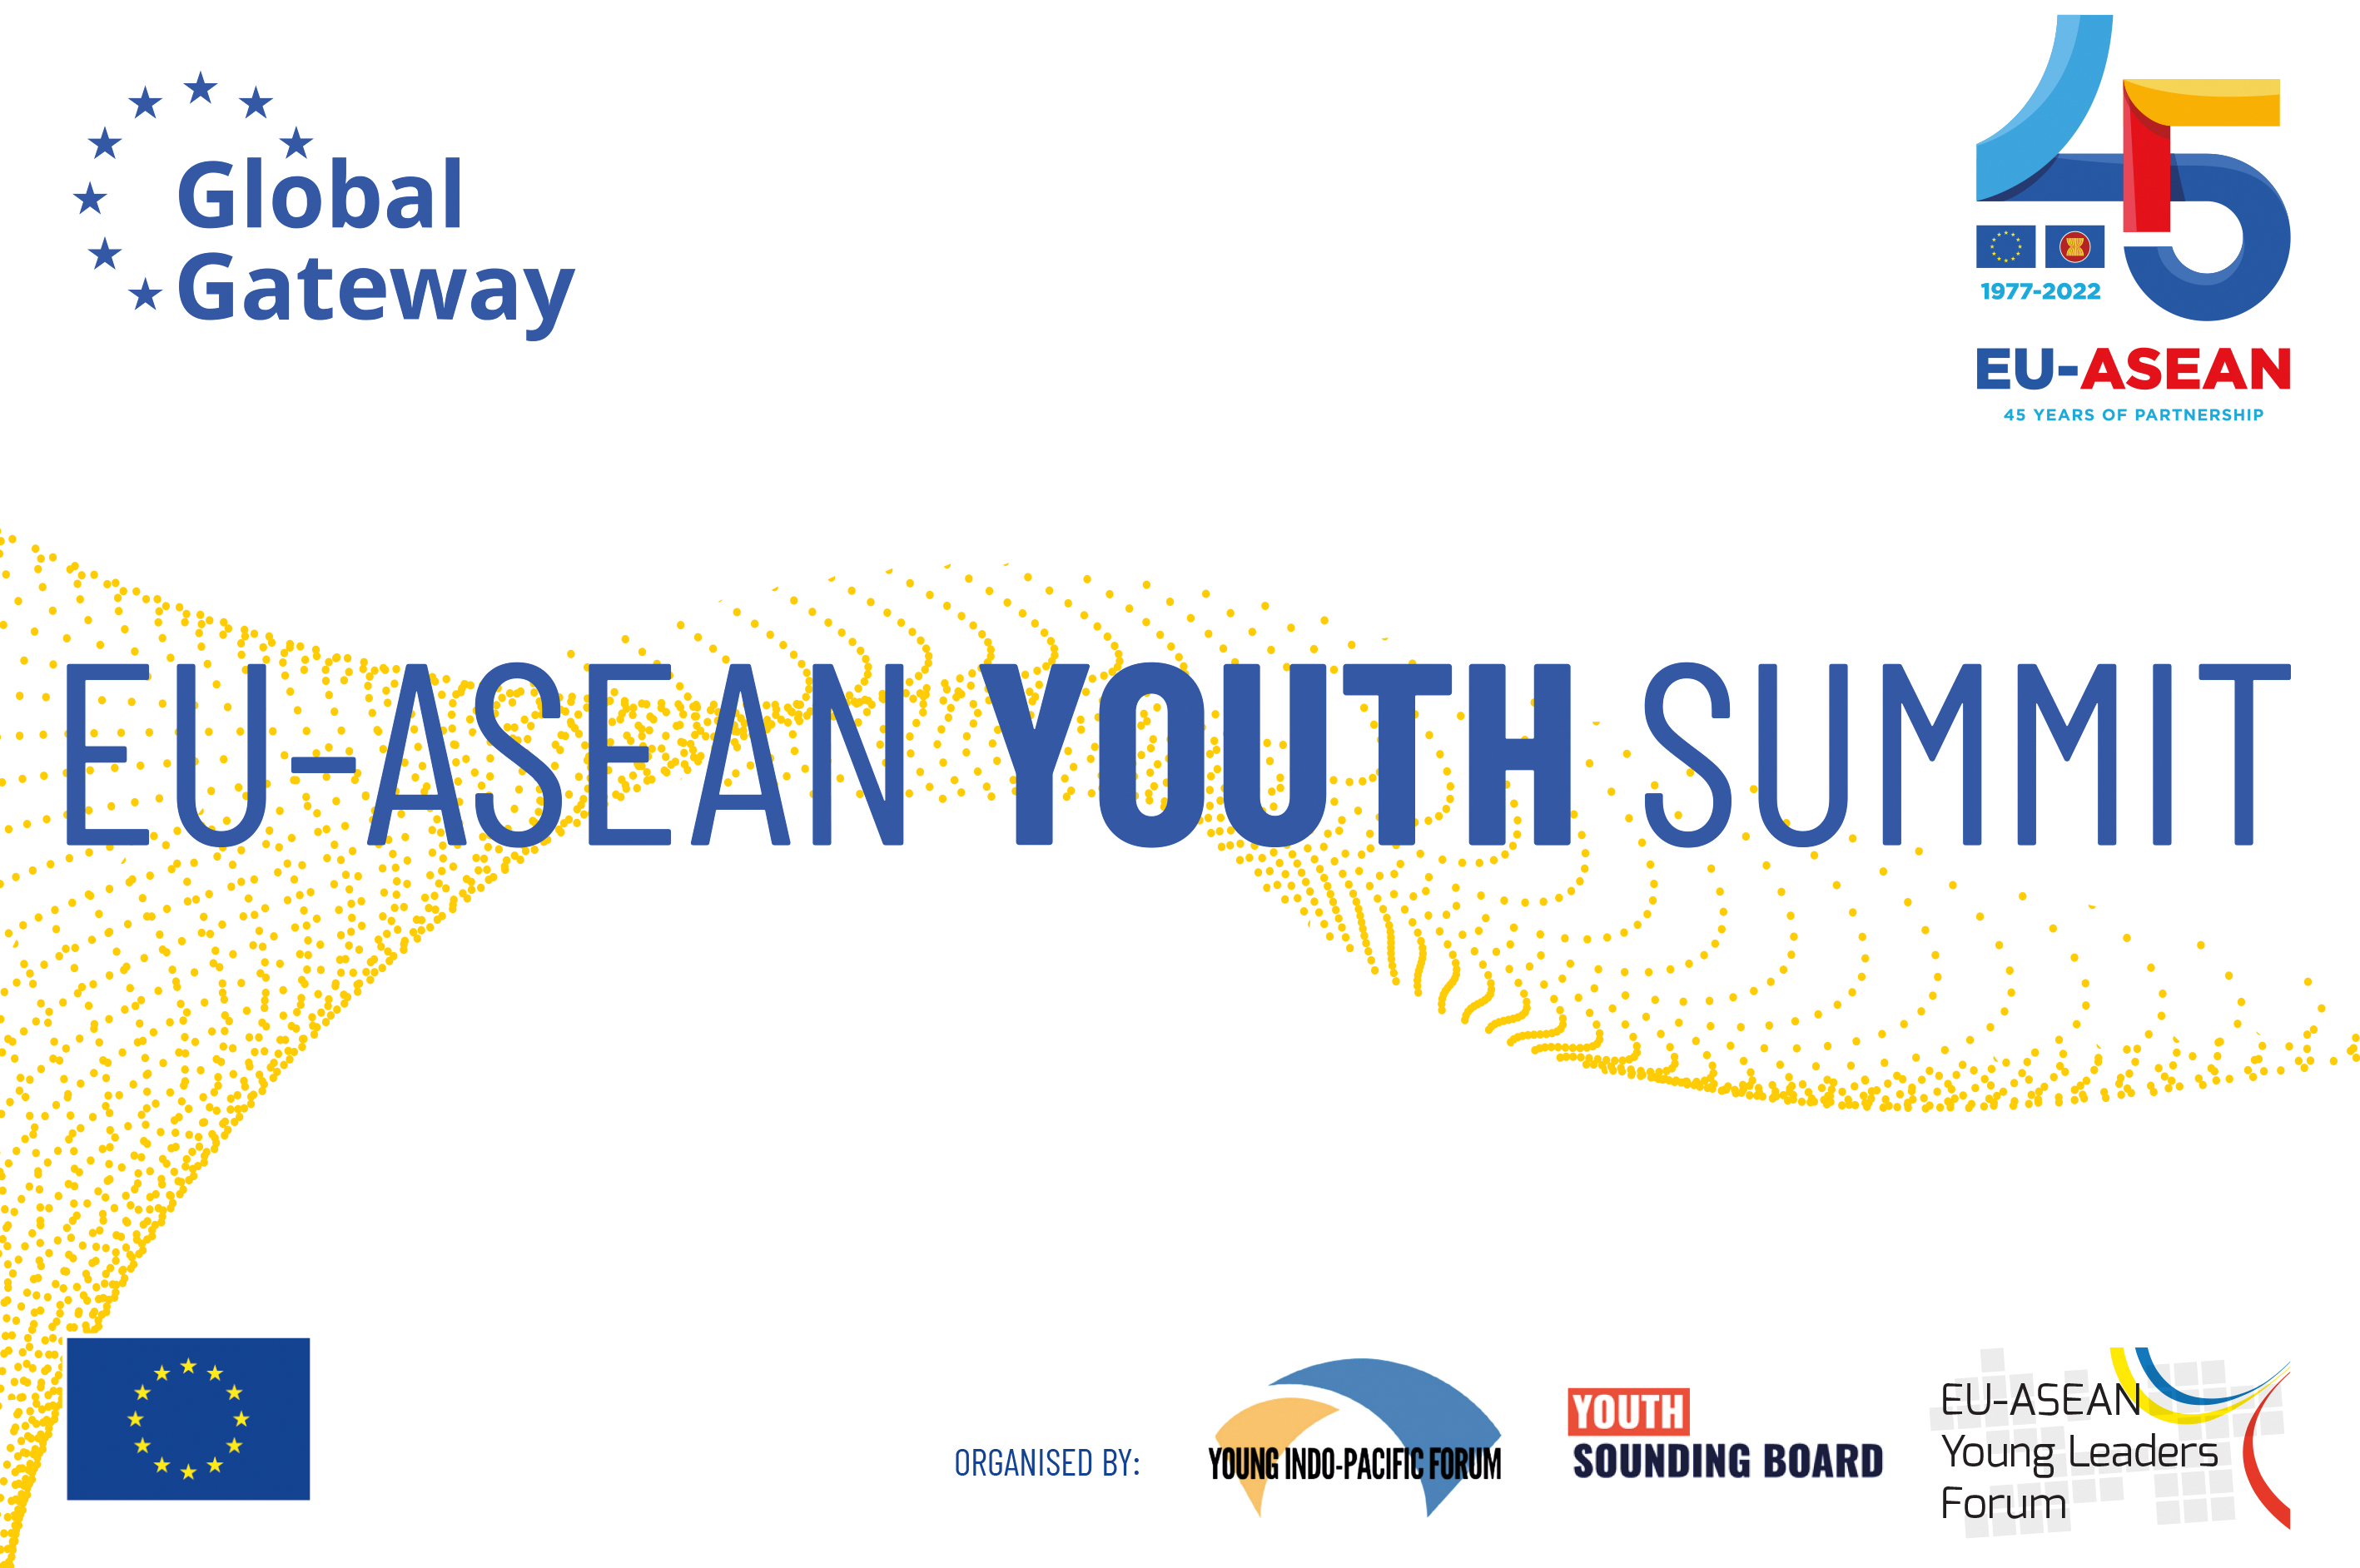 The EU-ASEAN Youth Summit is taking place on 13 December 2022